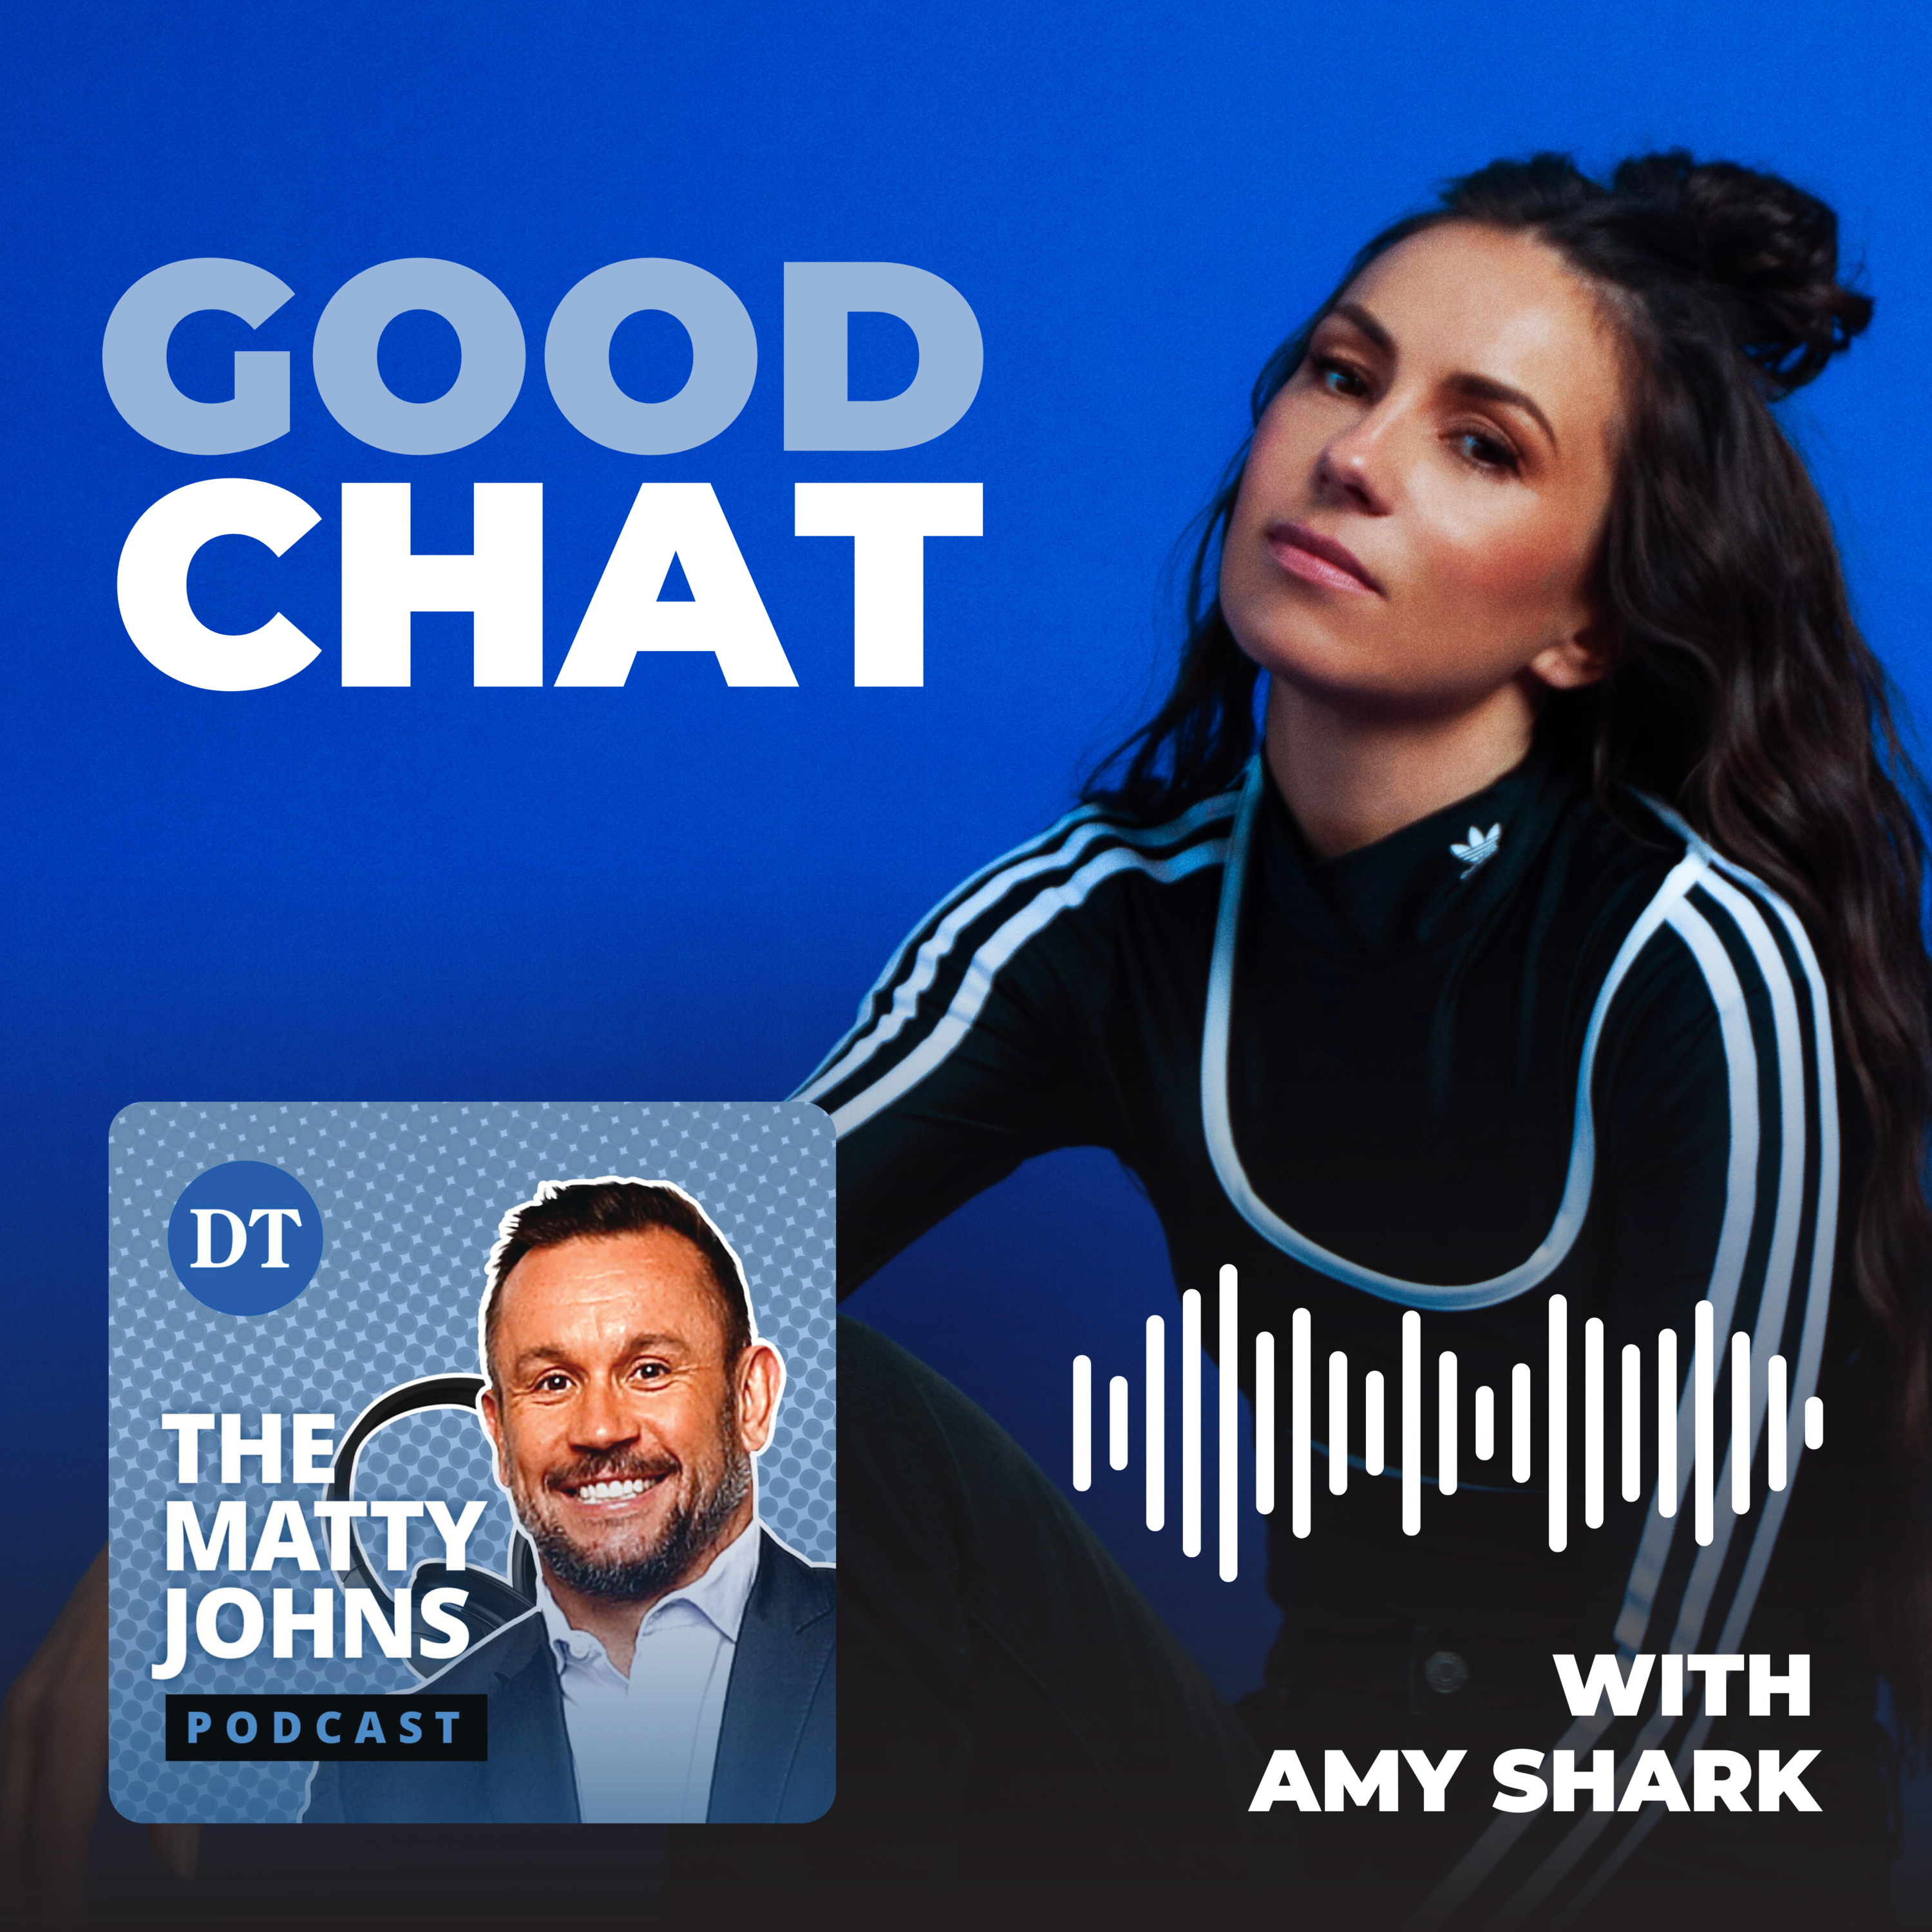 🎙Good Chat - Why We Adore Amy Shark